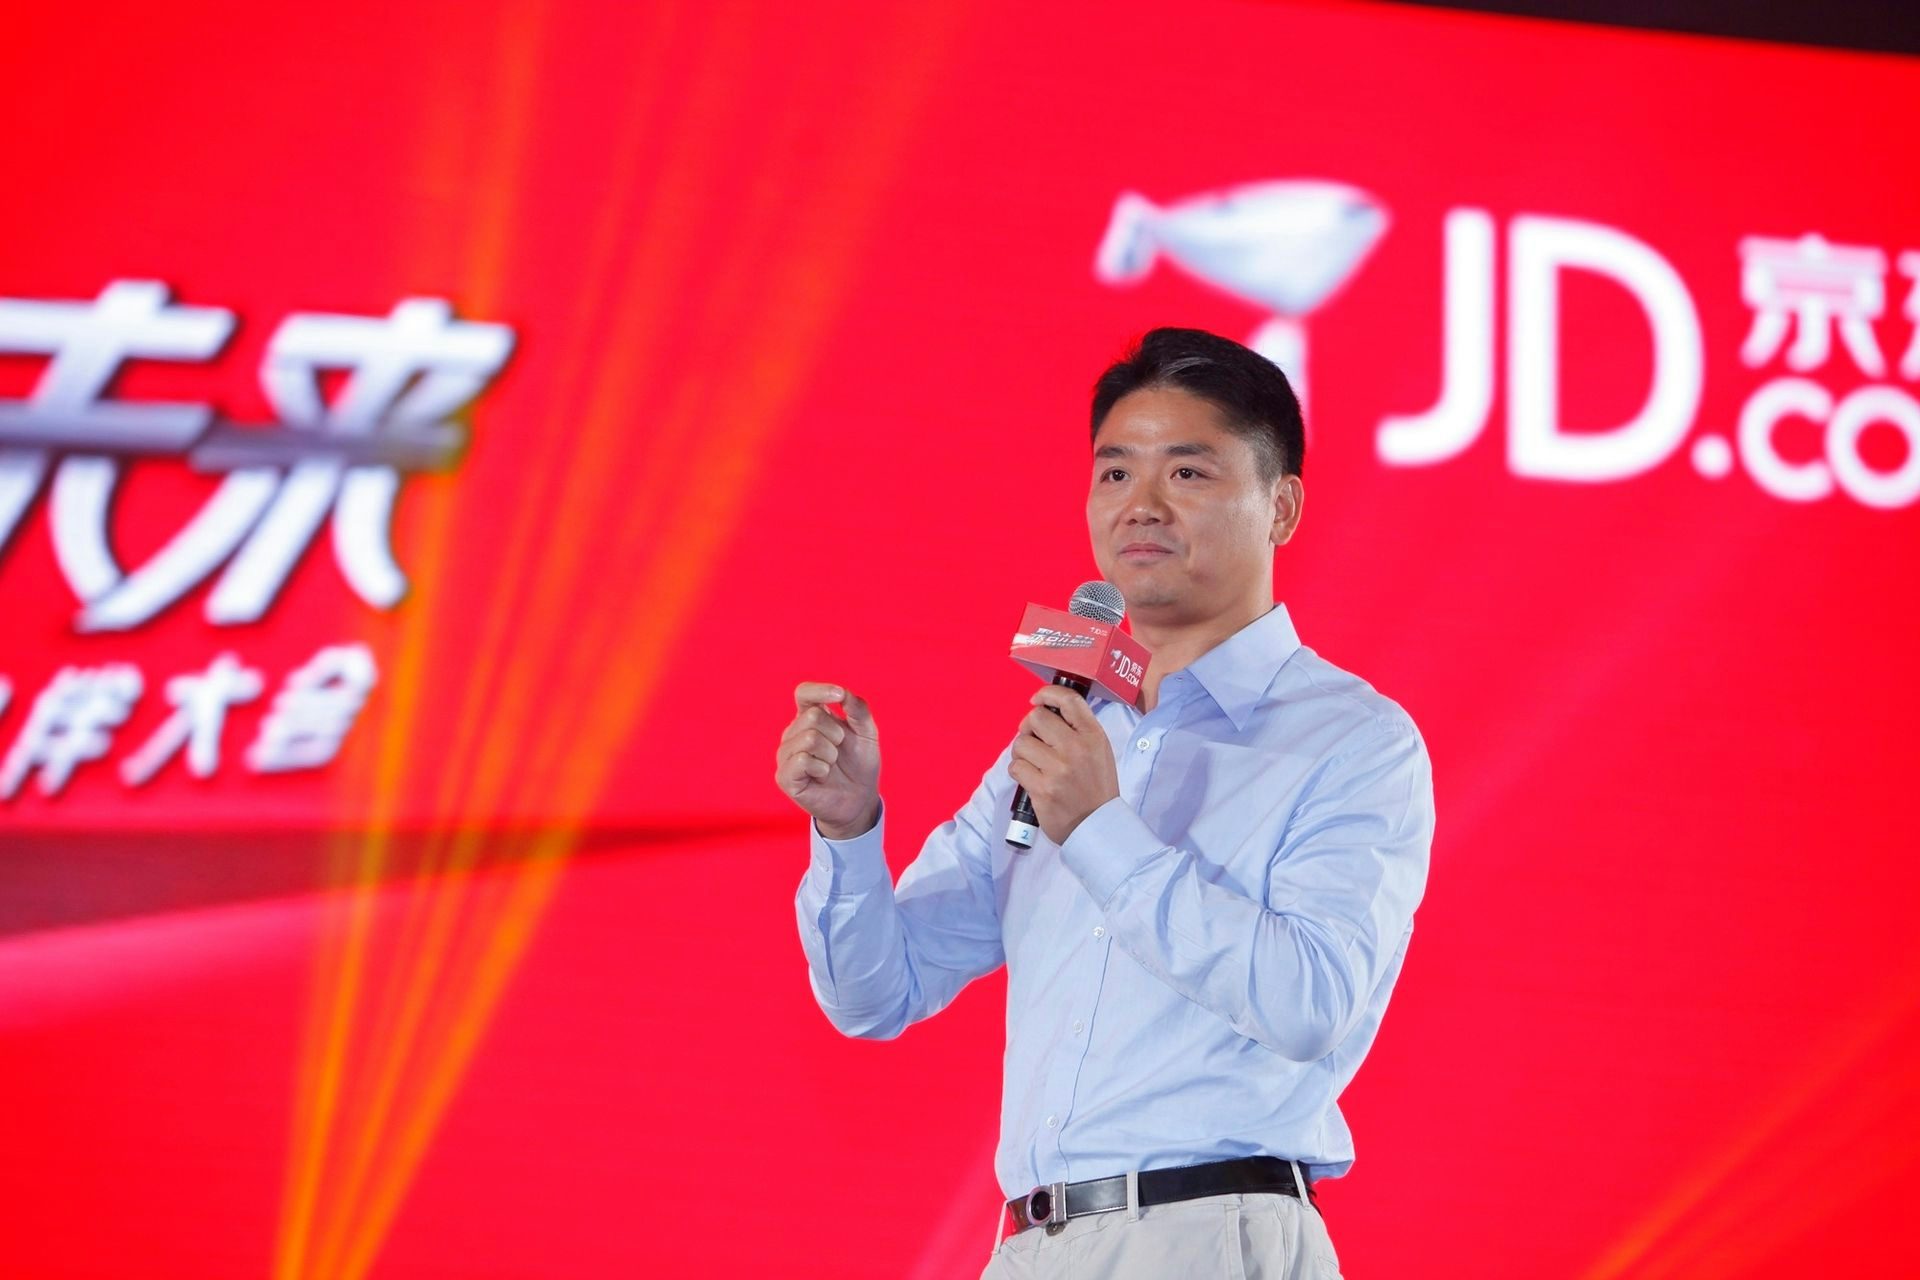 JD.com Expands Its E-commerce Empire to Spanish-speaking Markets